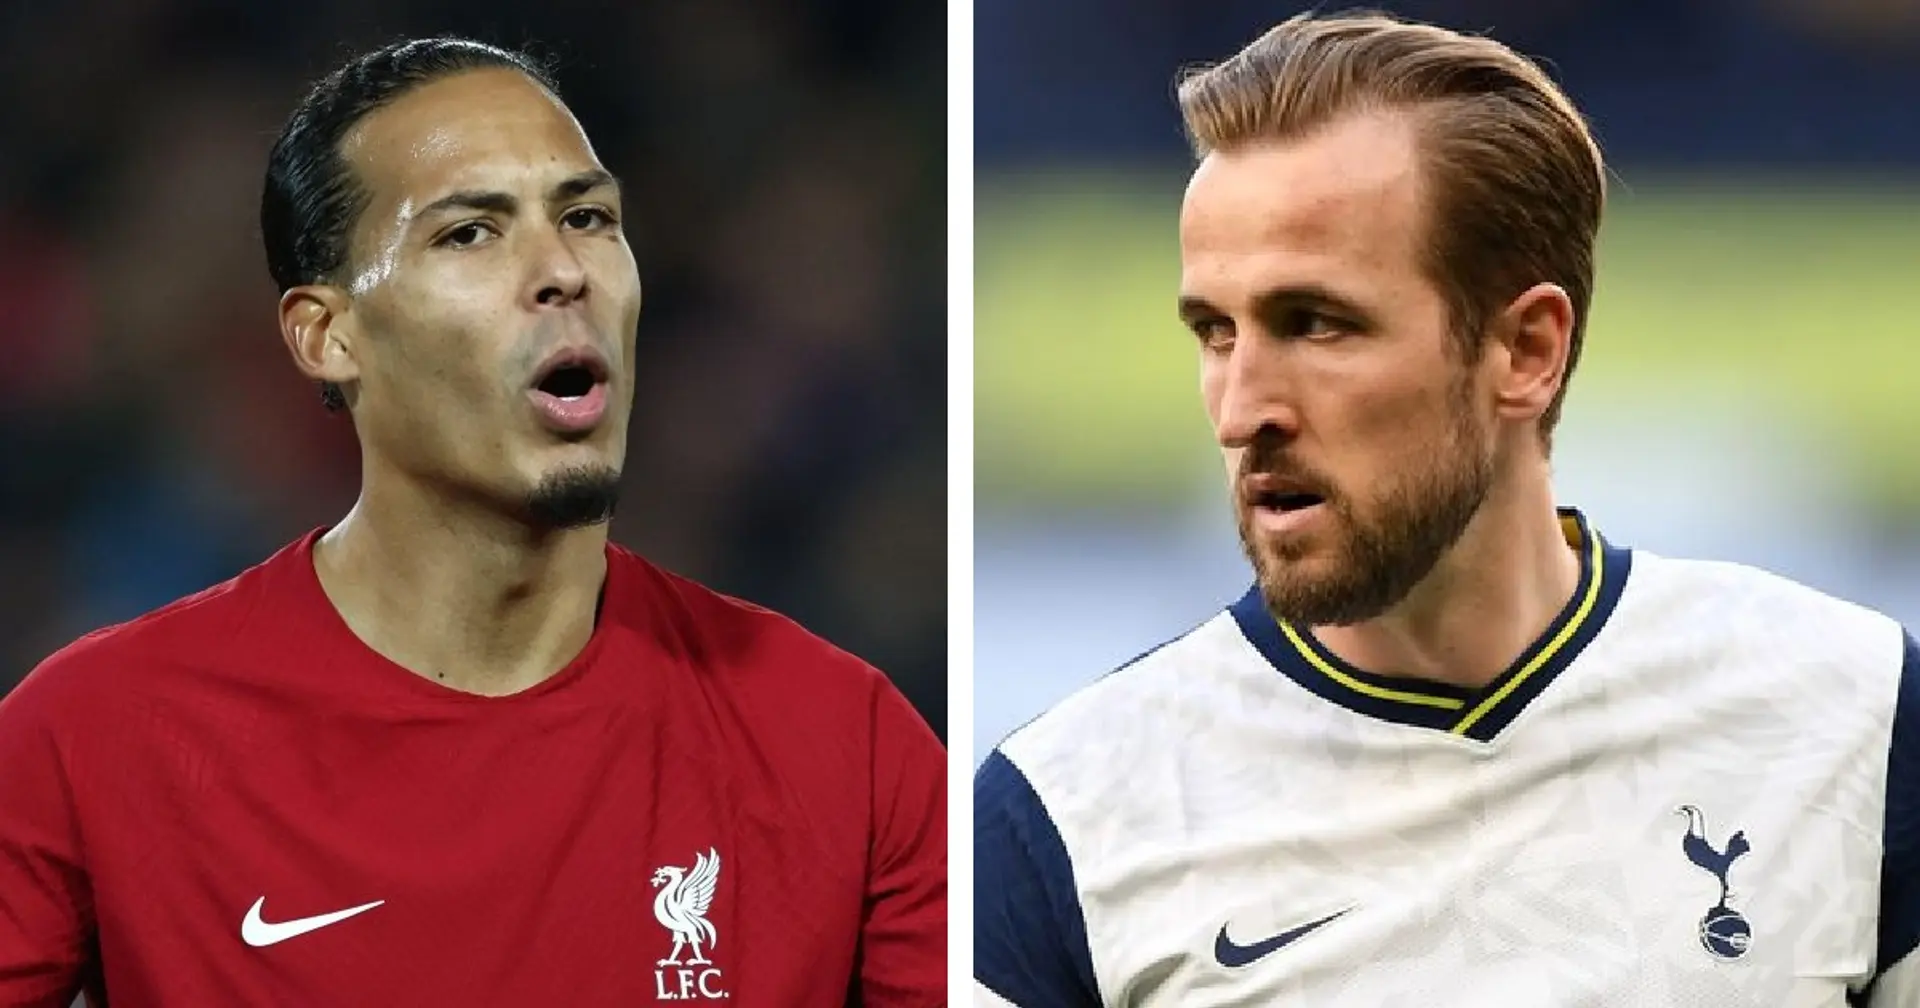 'He's been hearing that for months': Carragher predicts what Van Dijk or Kane will be accused of when they face each other